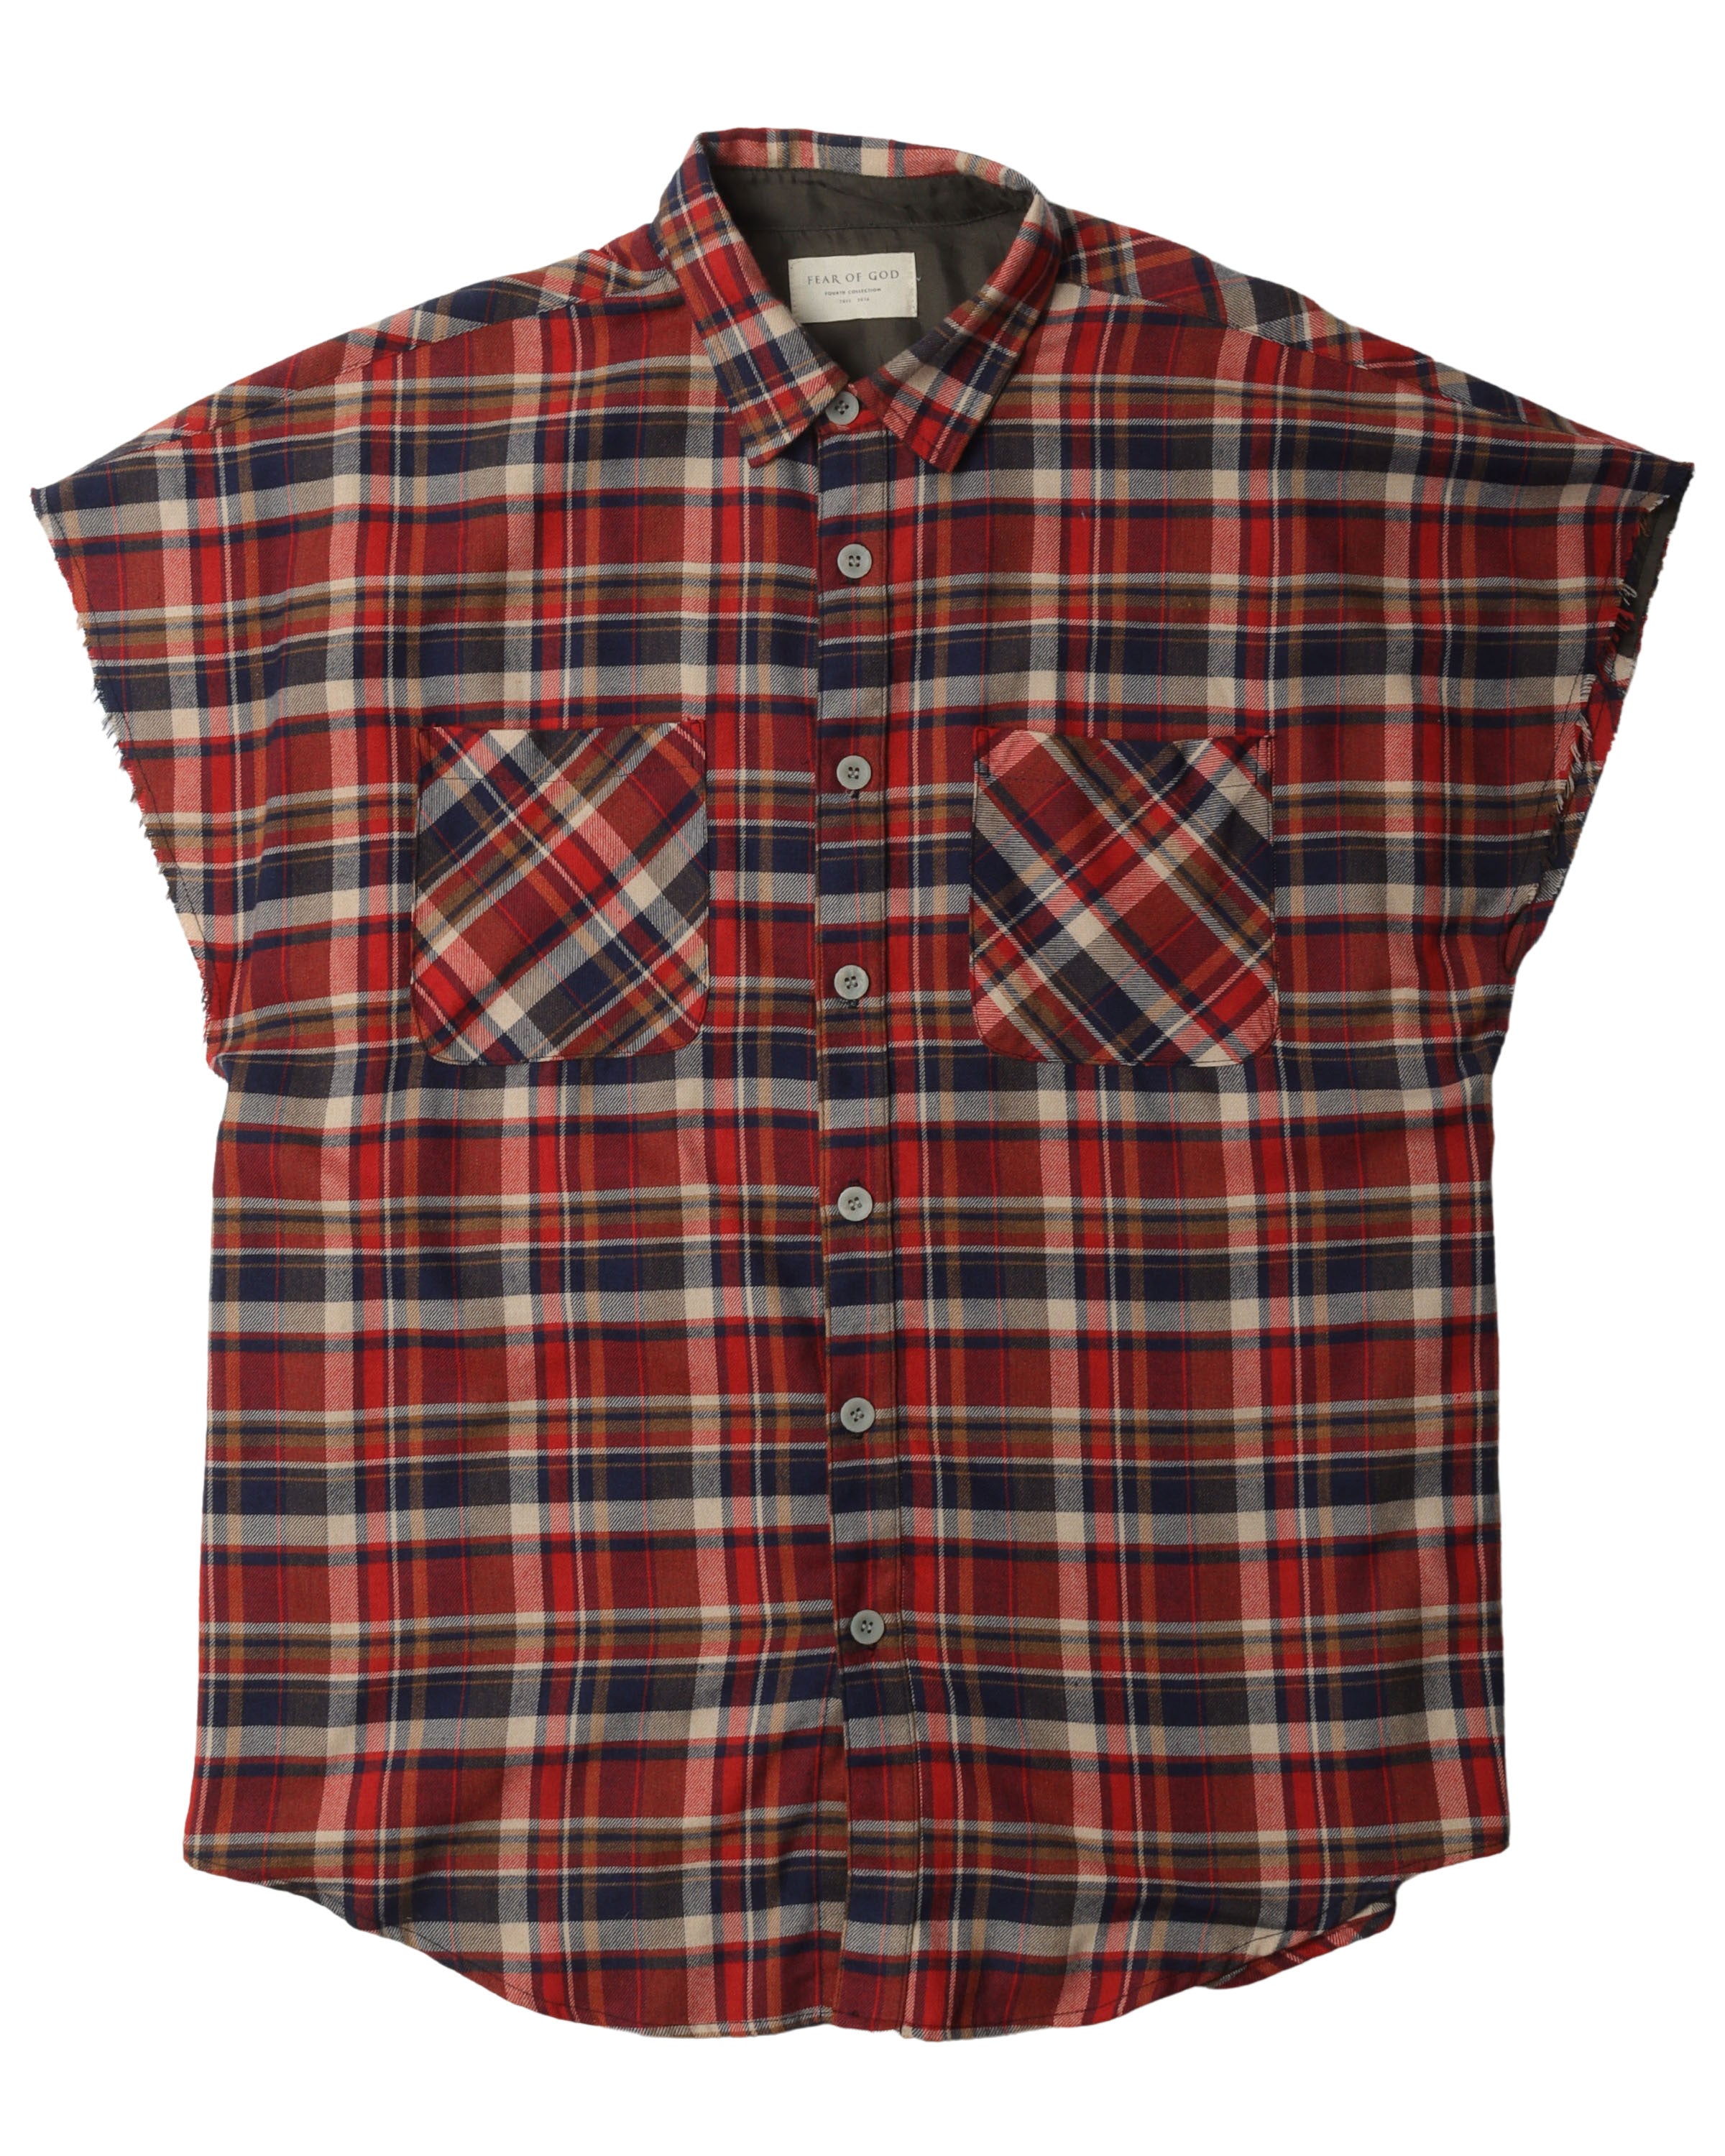 Fourth Collection Sleeveless Flannel Shirt